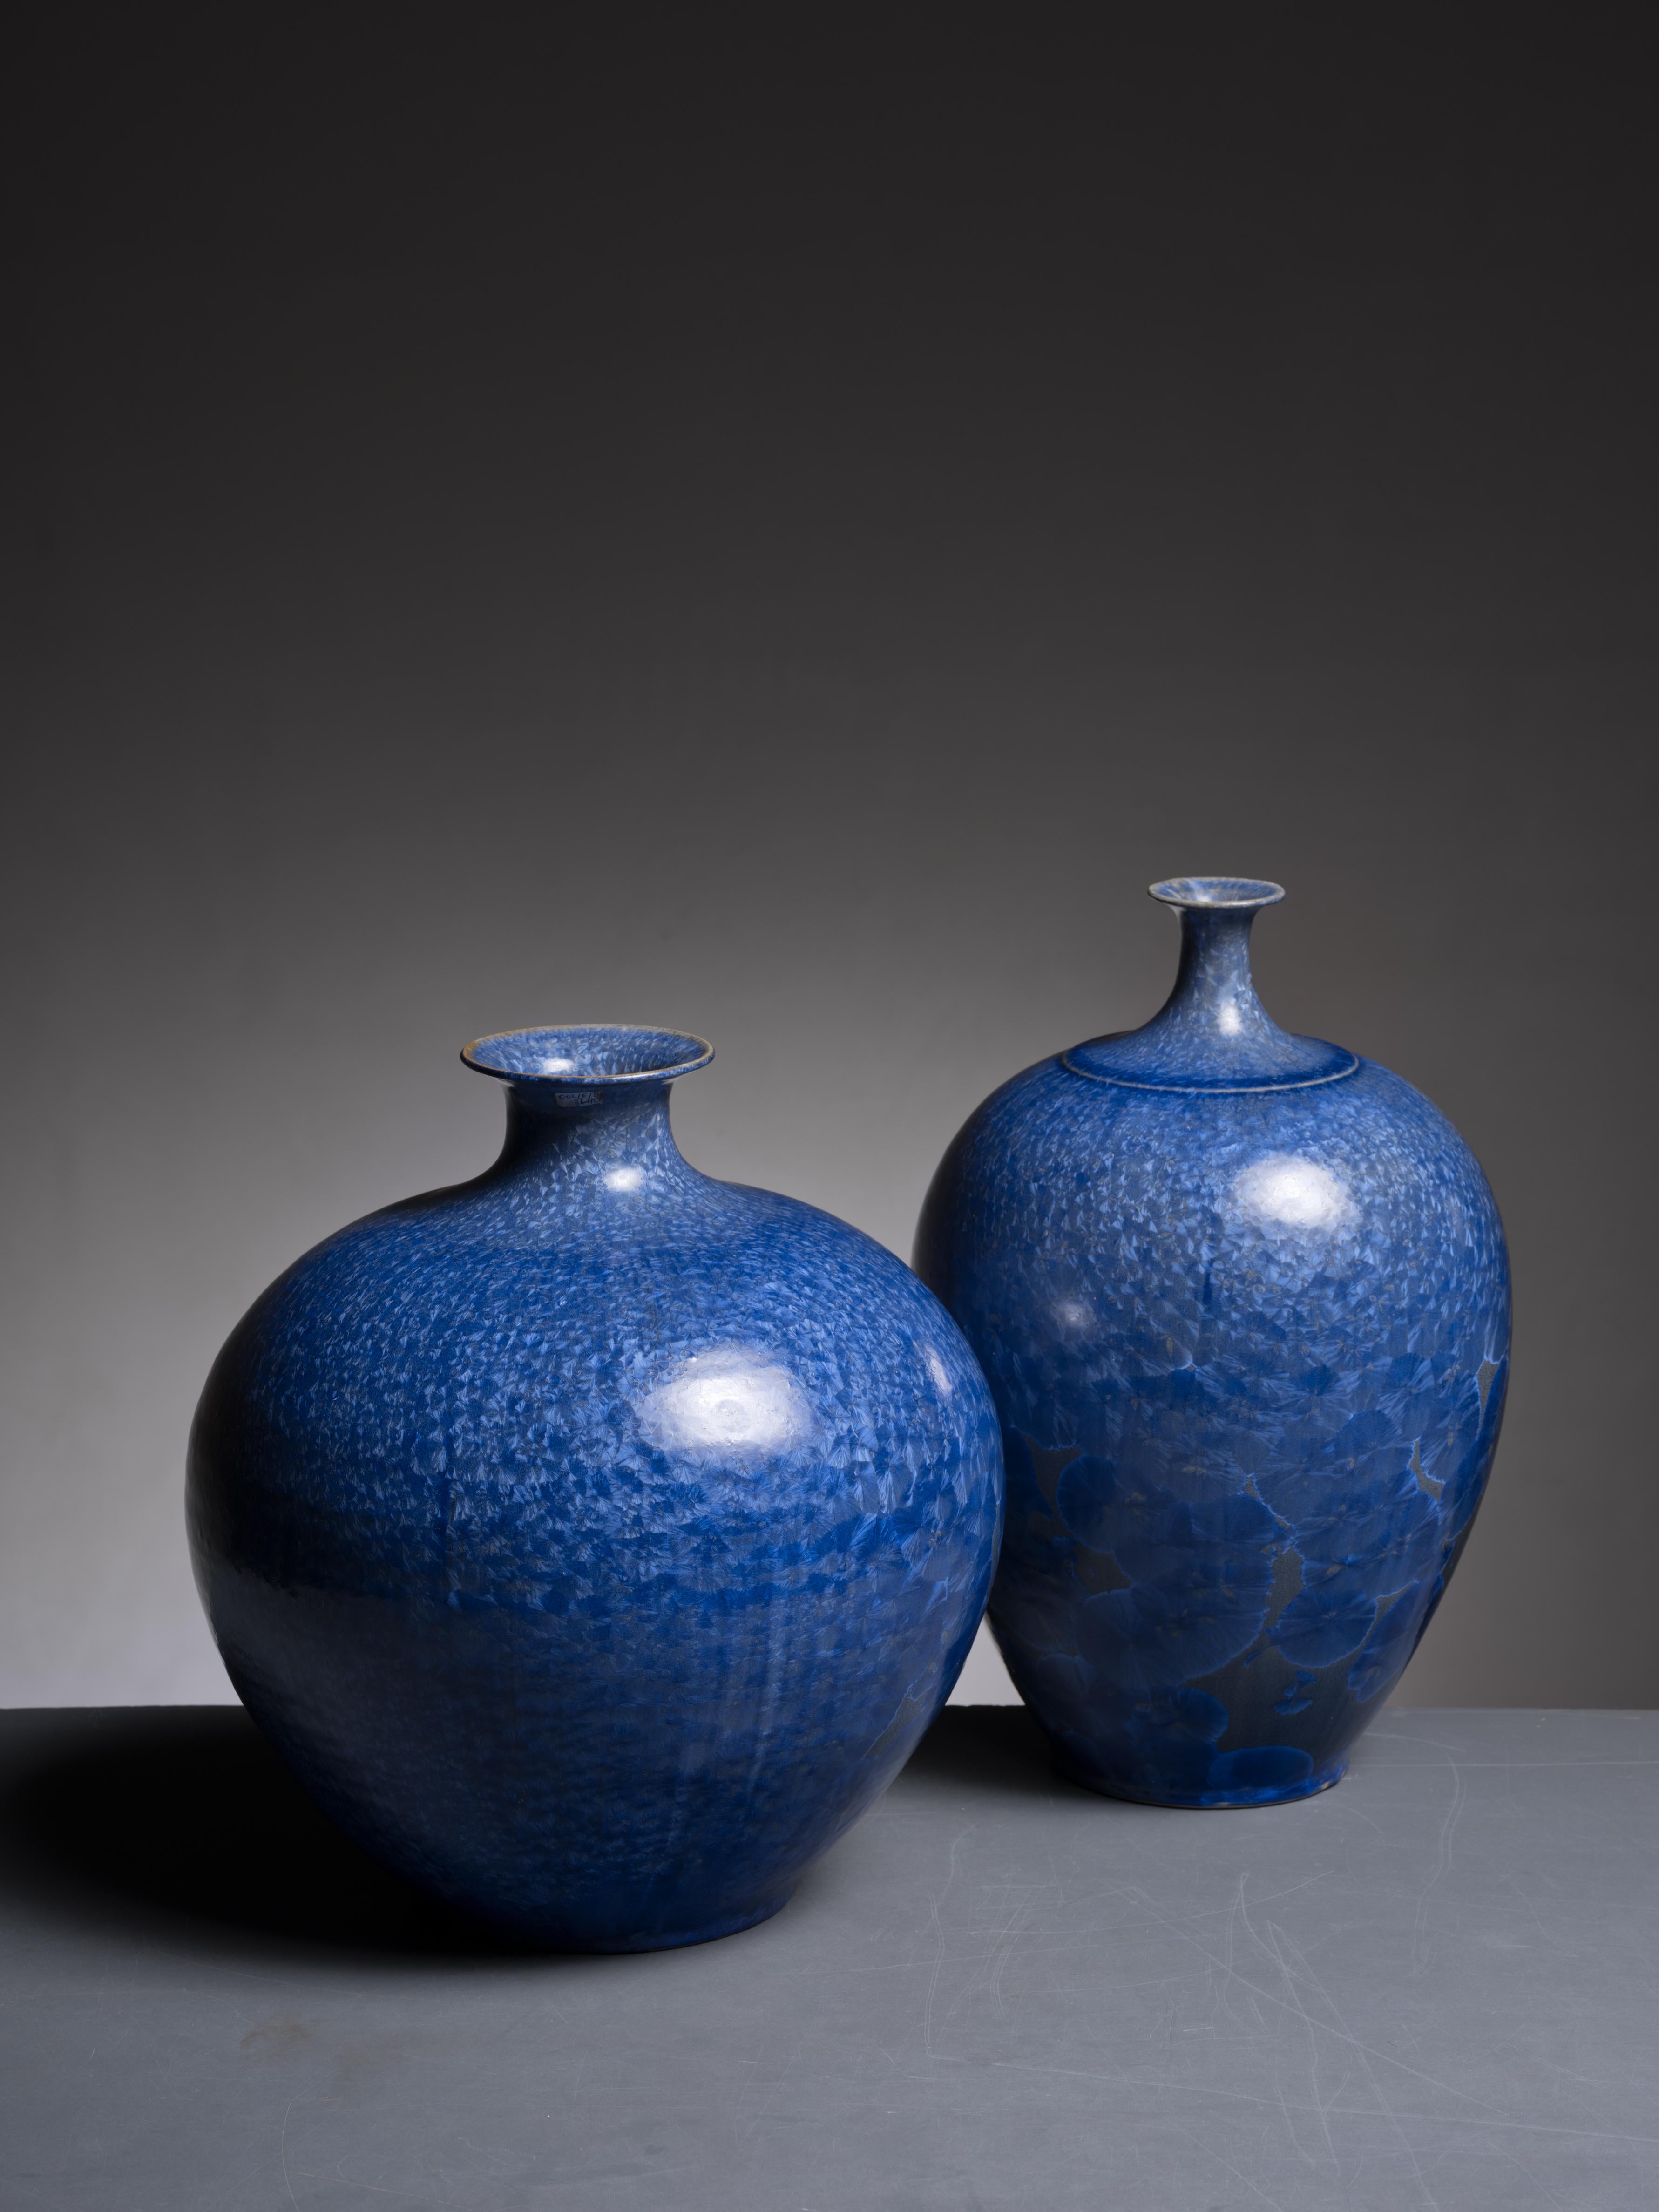 A set of three of hand-thrown ceramic vases with a blue crystalline glazing by Albert Kiessling for his Töpferei Kiessling in Langhessen, Germany. Marked by Kiessling and in an excellent condition.

The measurements stated are of the largest vase.